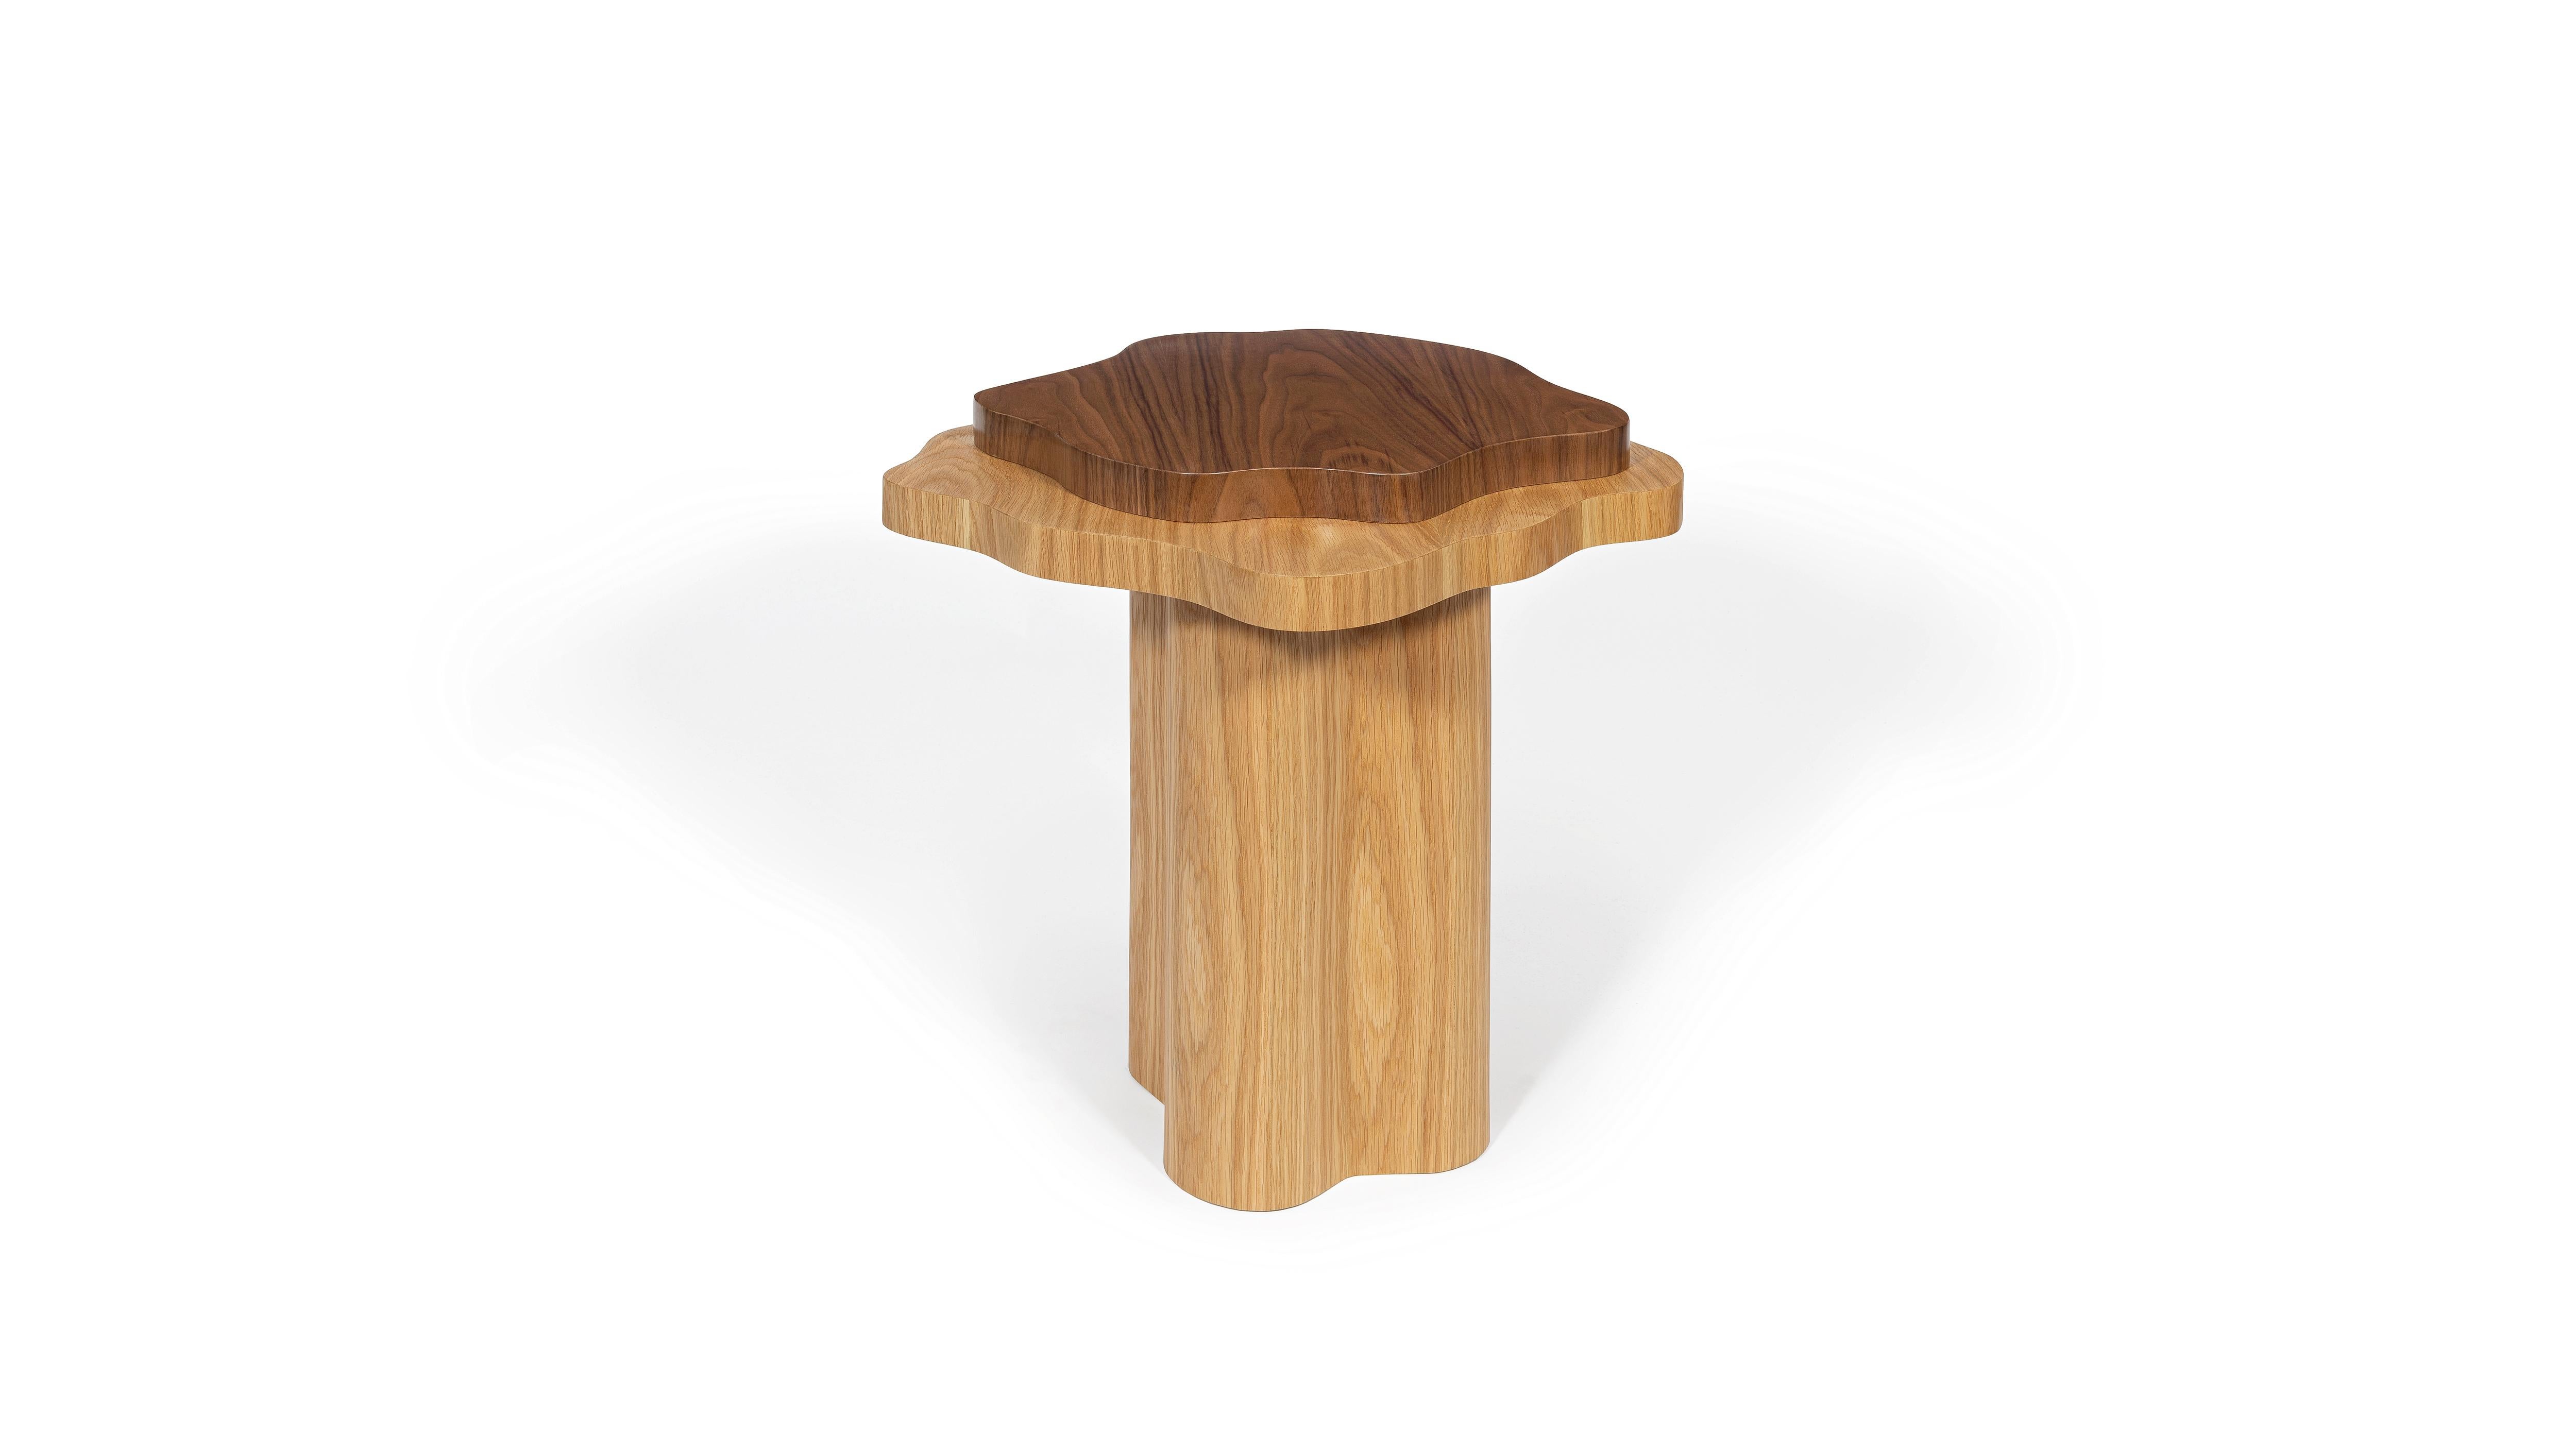 Arizona Side Table by InsidherLand
Dimensions: D 50 x W 50 x H 55 cm.
Materials: Walnut and oak veneer.
18 kg.

In the remote location of Coyote Buttes lies one of Arizona’s treasures. The Wave is a remarkable rock formation made of eroded sandstone